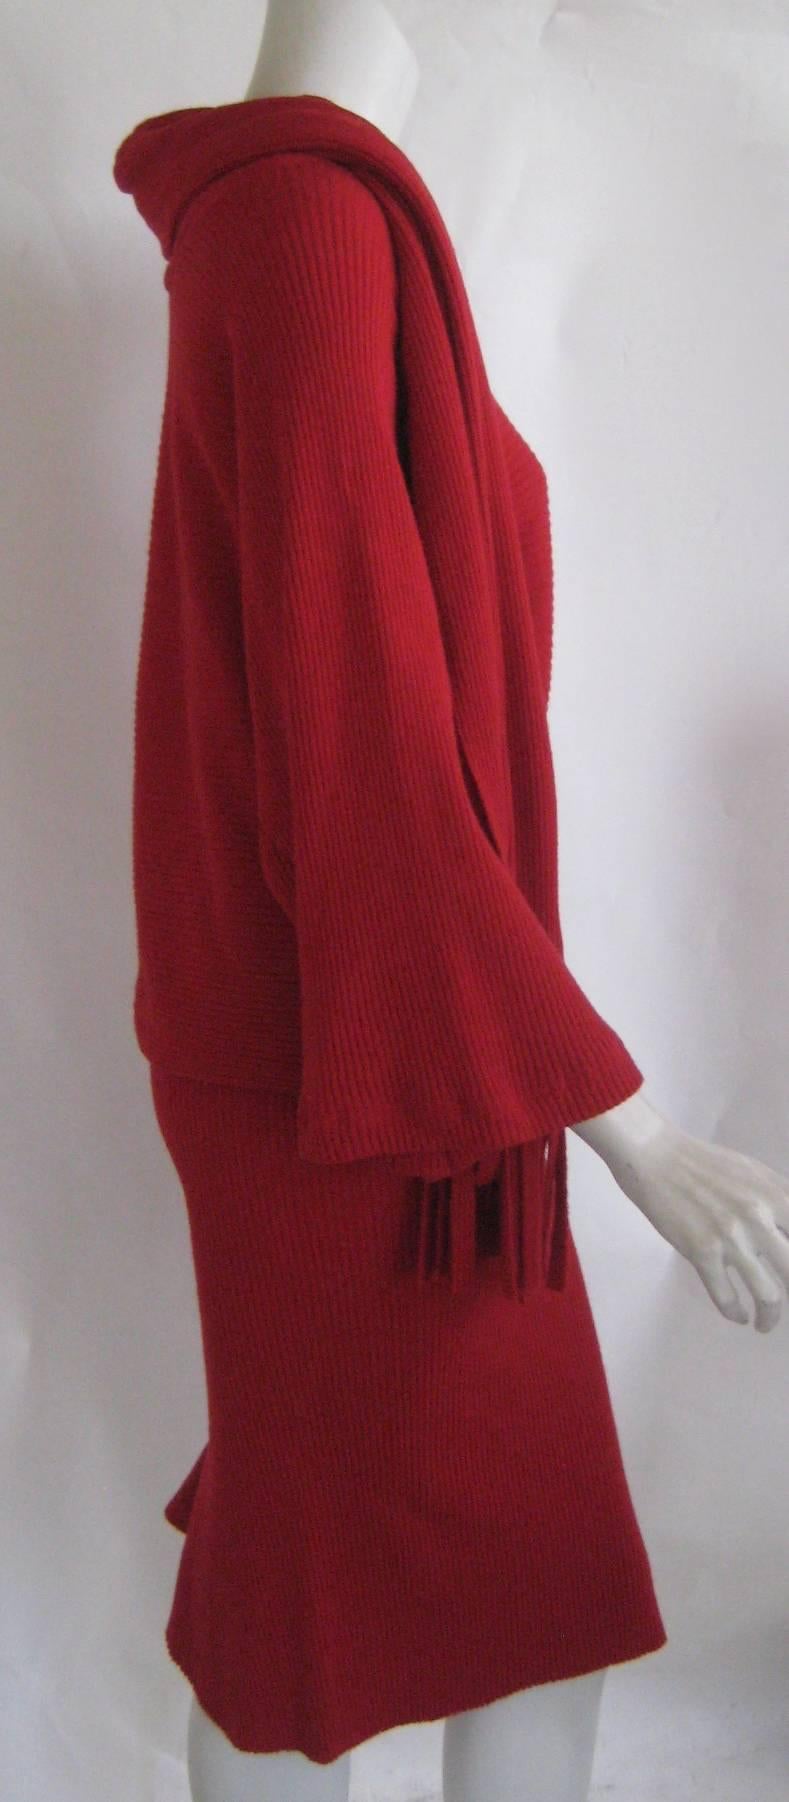 Rare 1980s Patrick Kelly Button Sweater Ensemble  In Excellent Condition For Sale In Chicago, IL